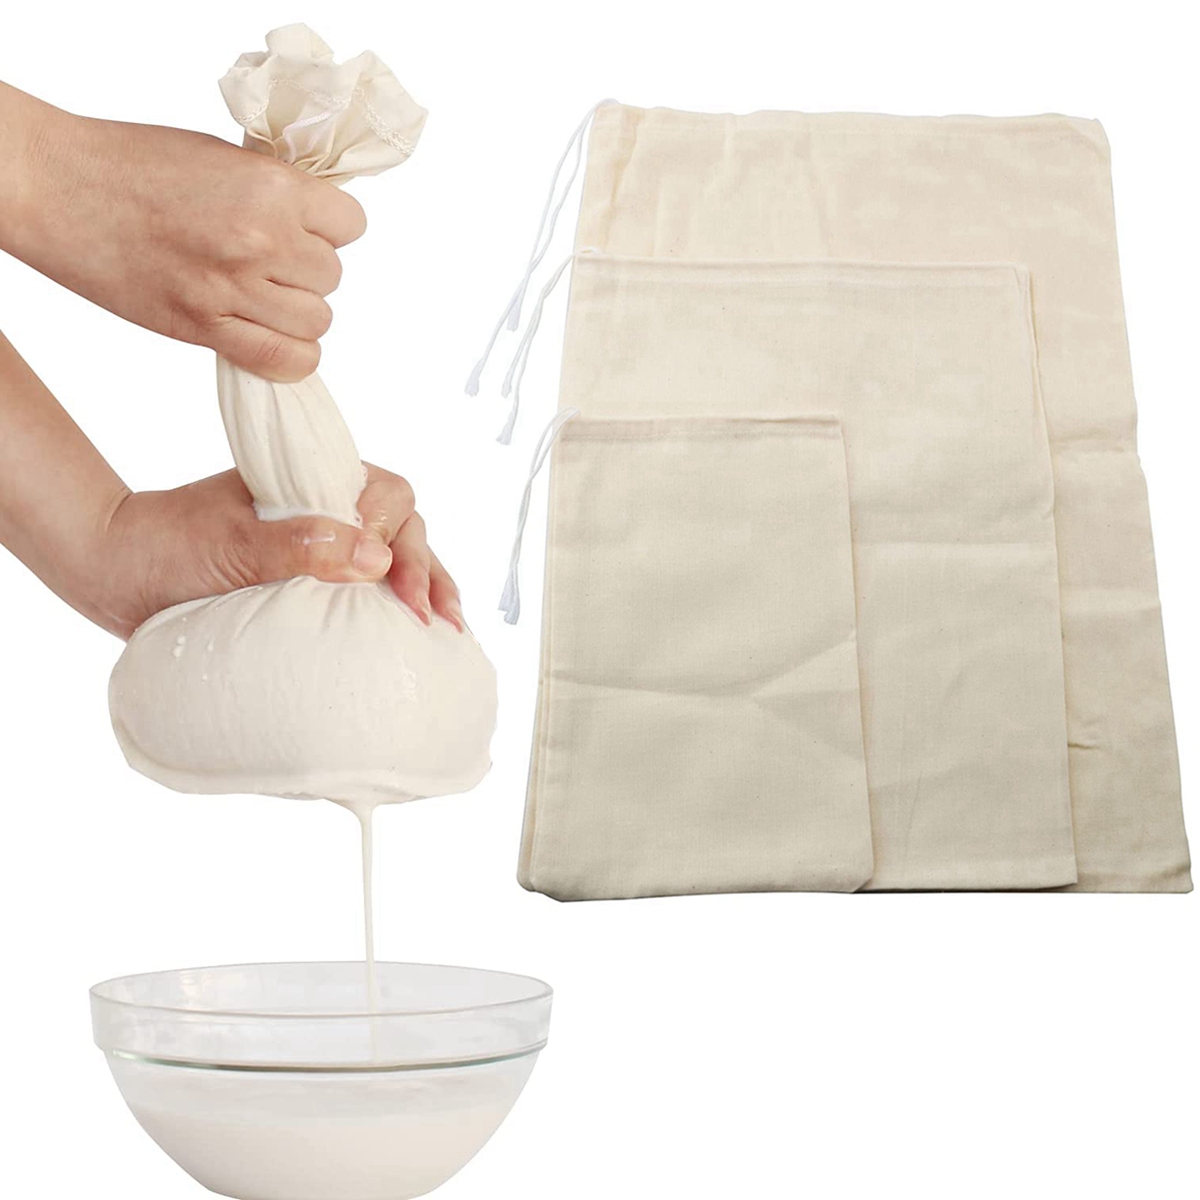 

3 Pcs Reusable Cheesecloth Bags, For Straining Coffee Filter Strainers, Mesh Pouch, Squeezable Natural Straining Nut Milk Filter Bag